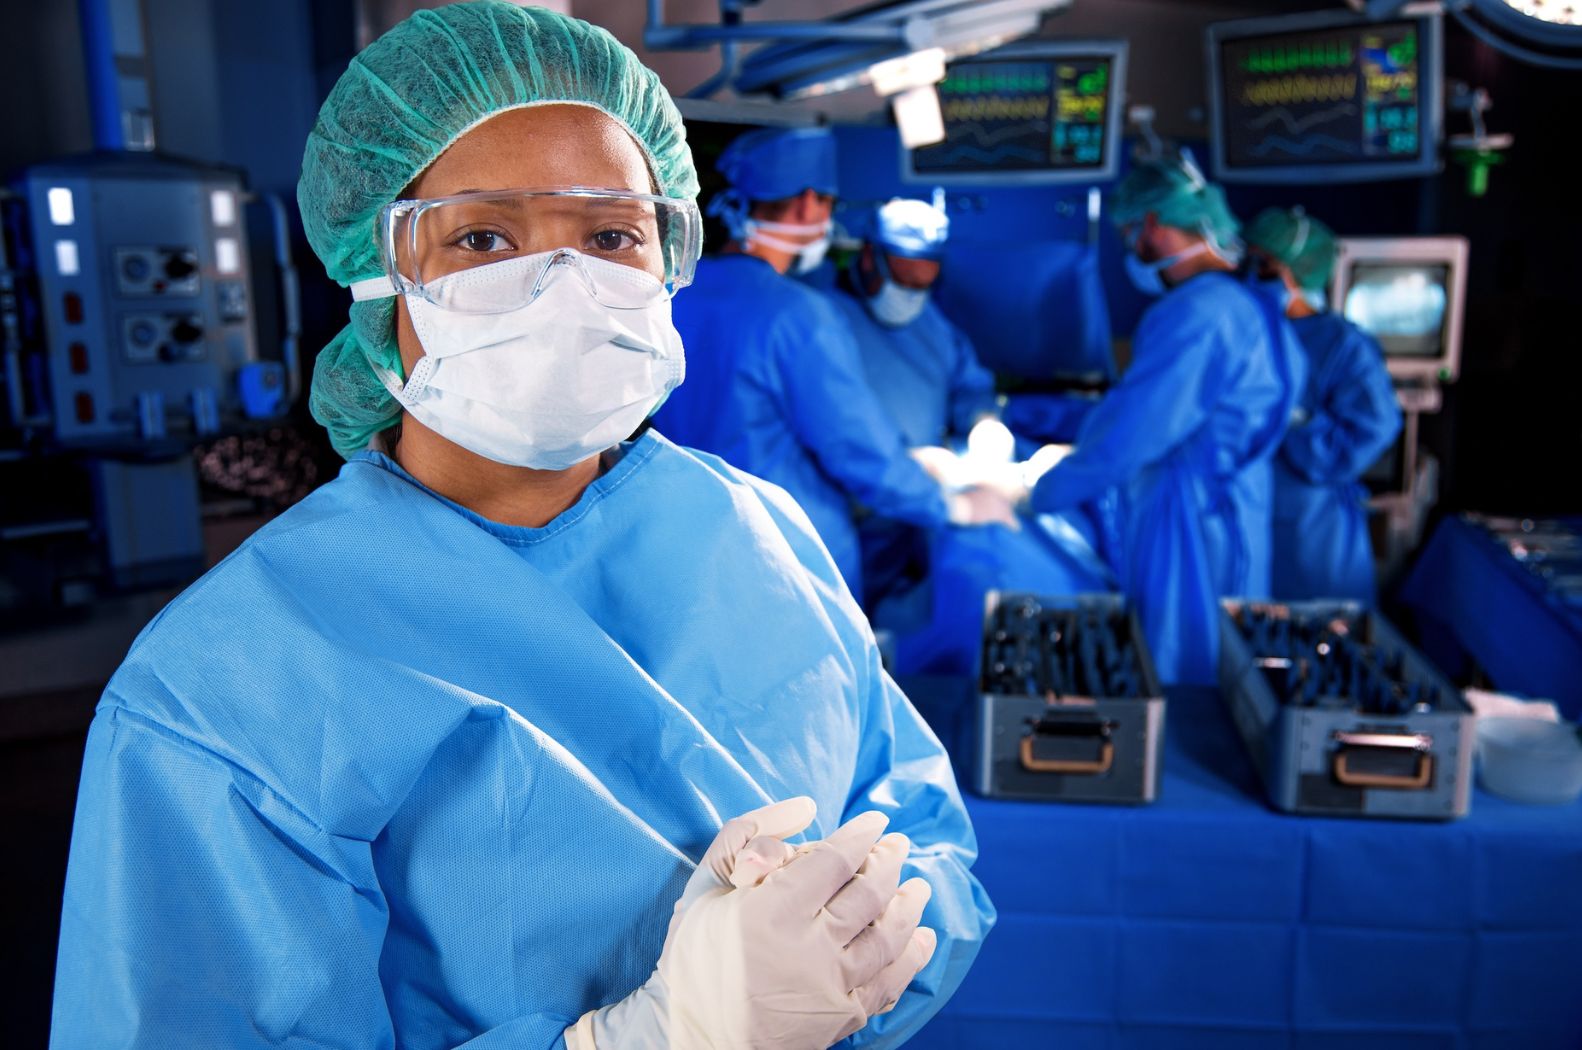 PPE and protective gowns for medical facilities